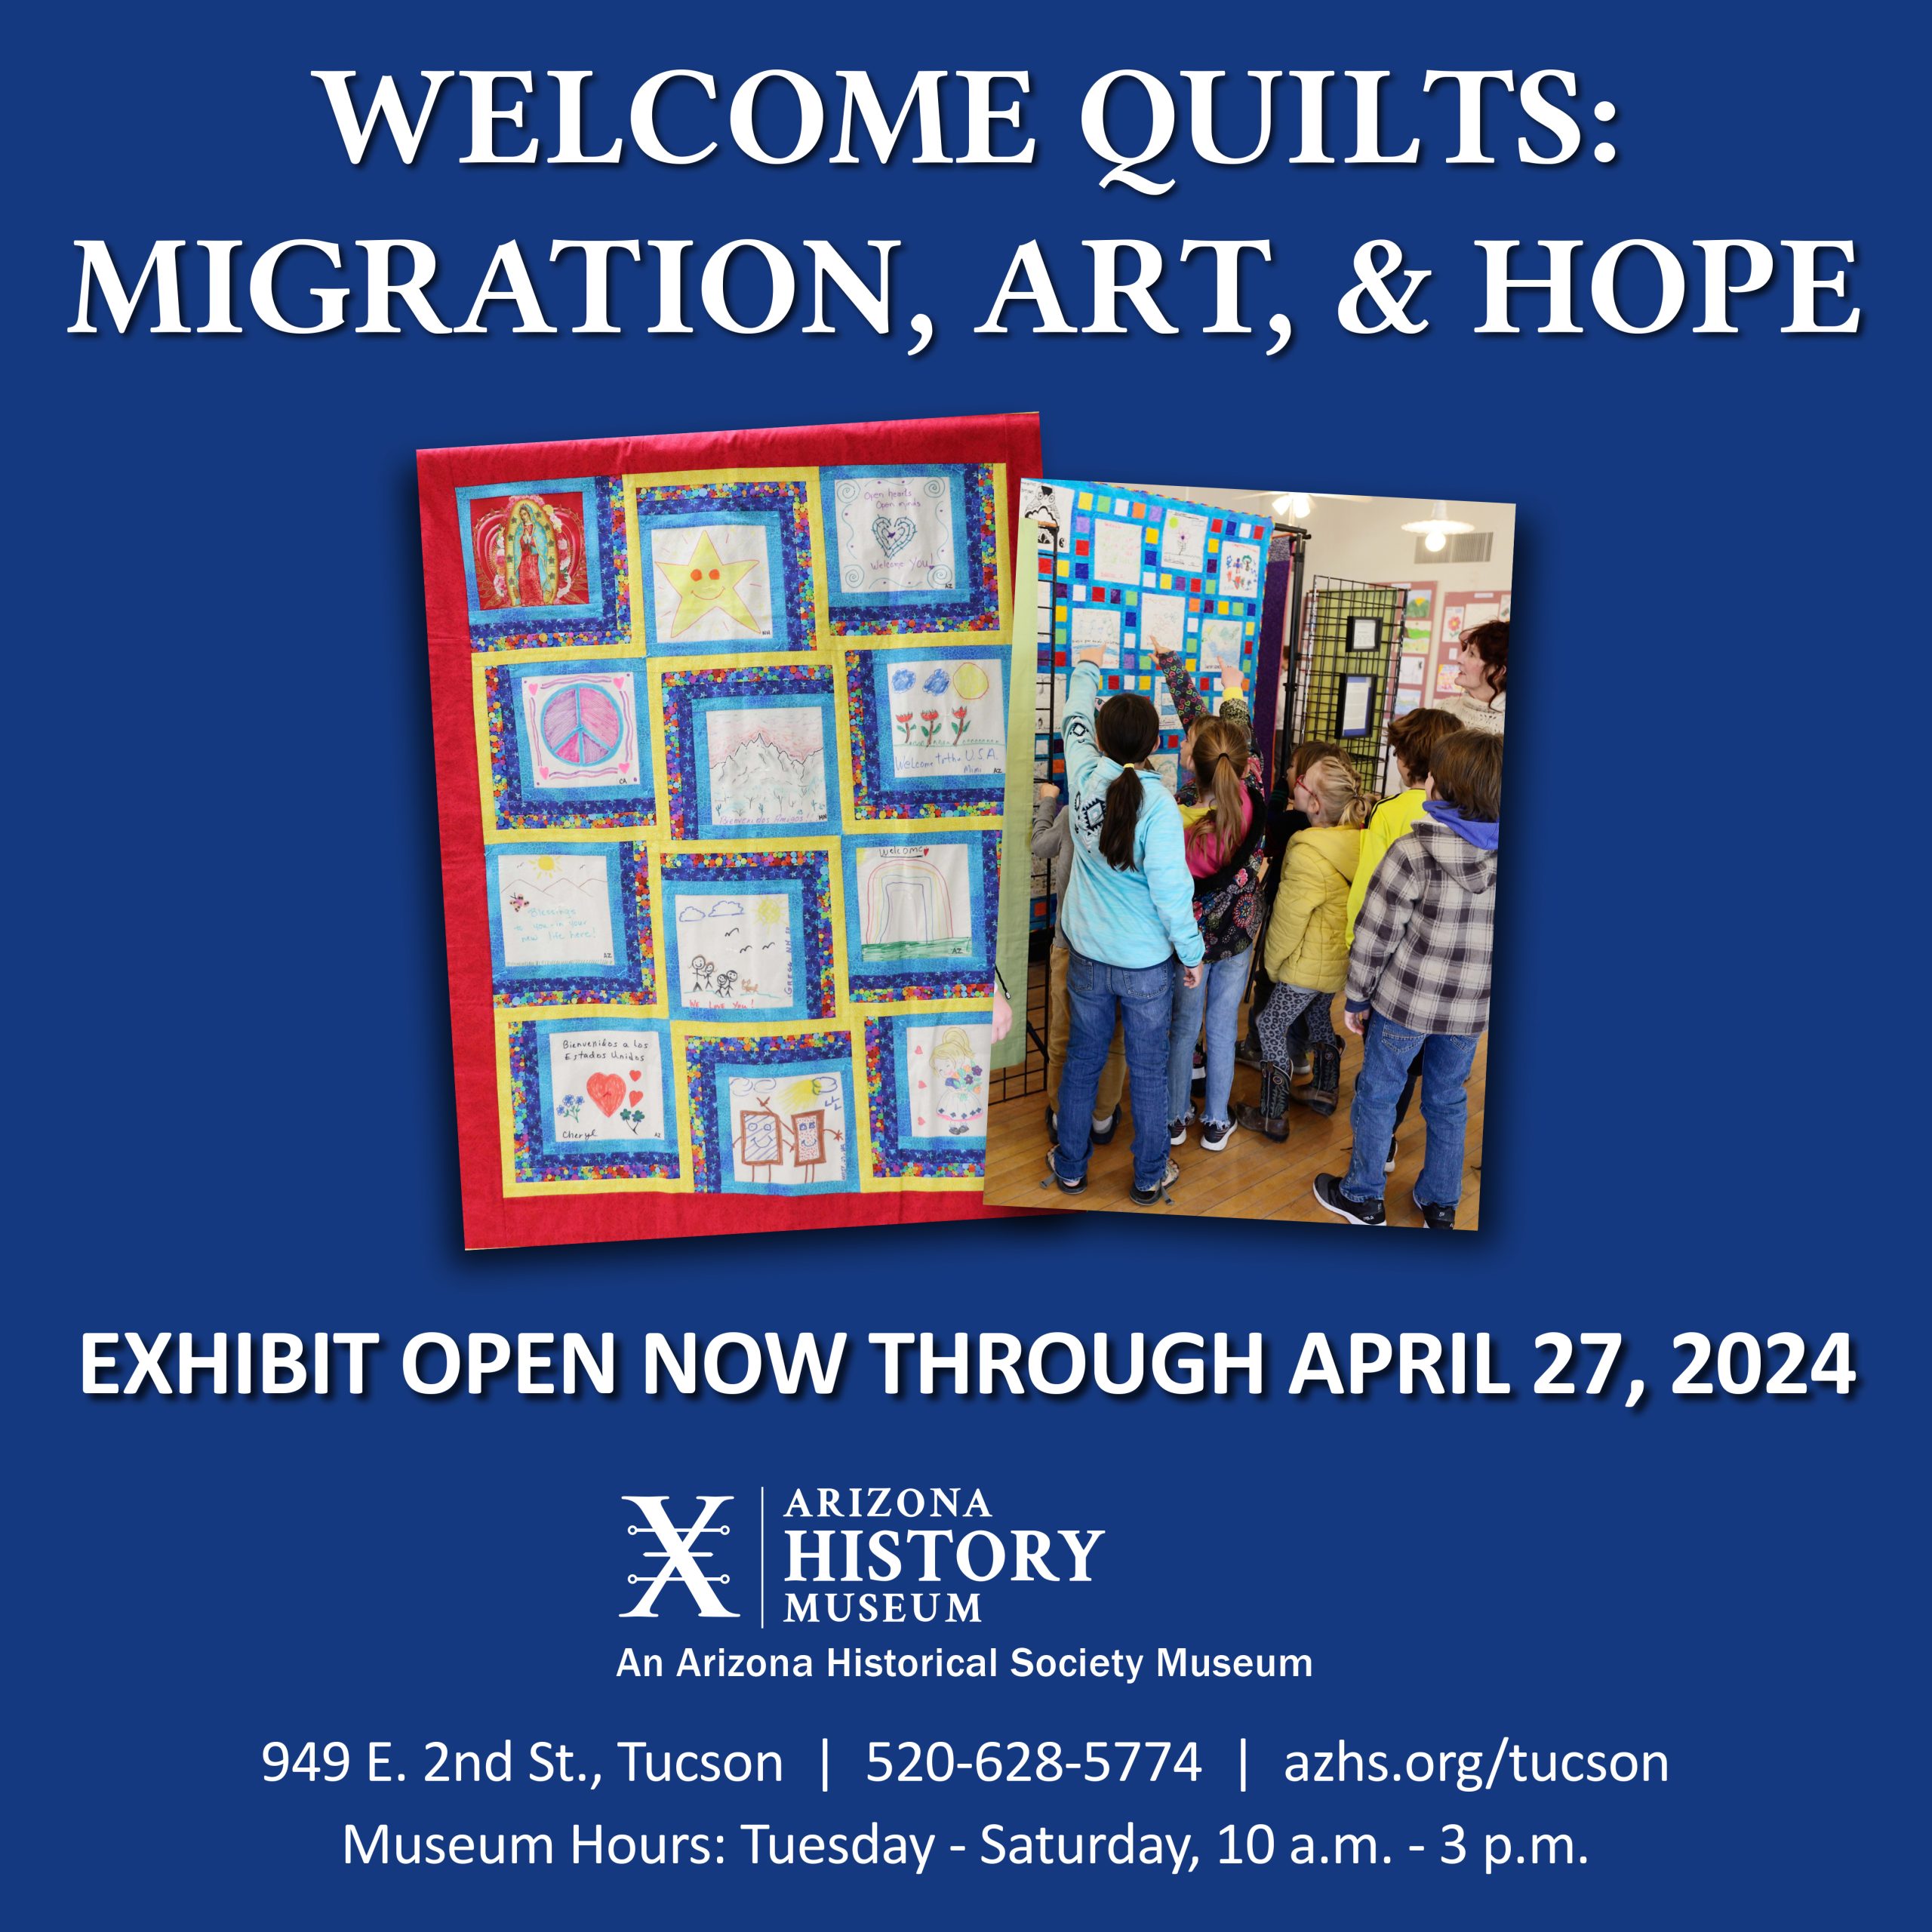 Welcome Quilts: Migration, Art, & Hope